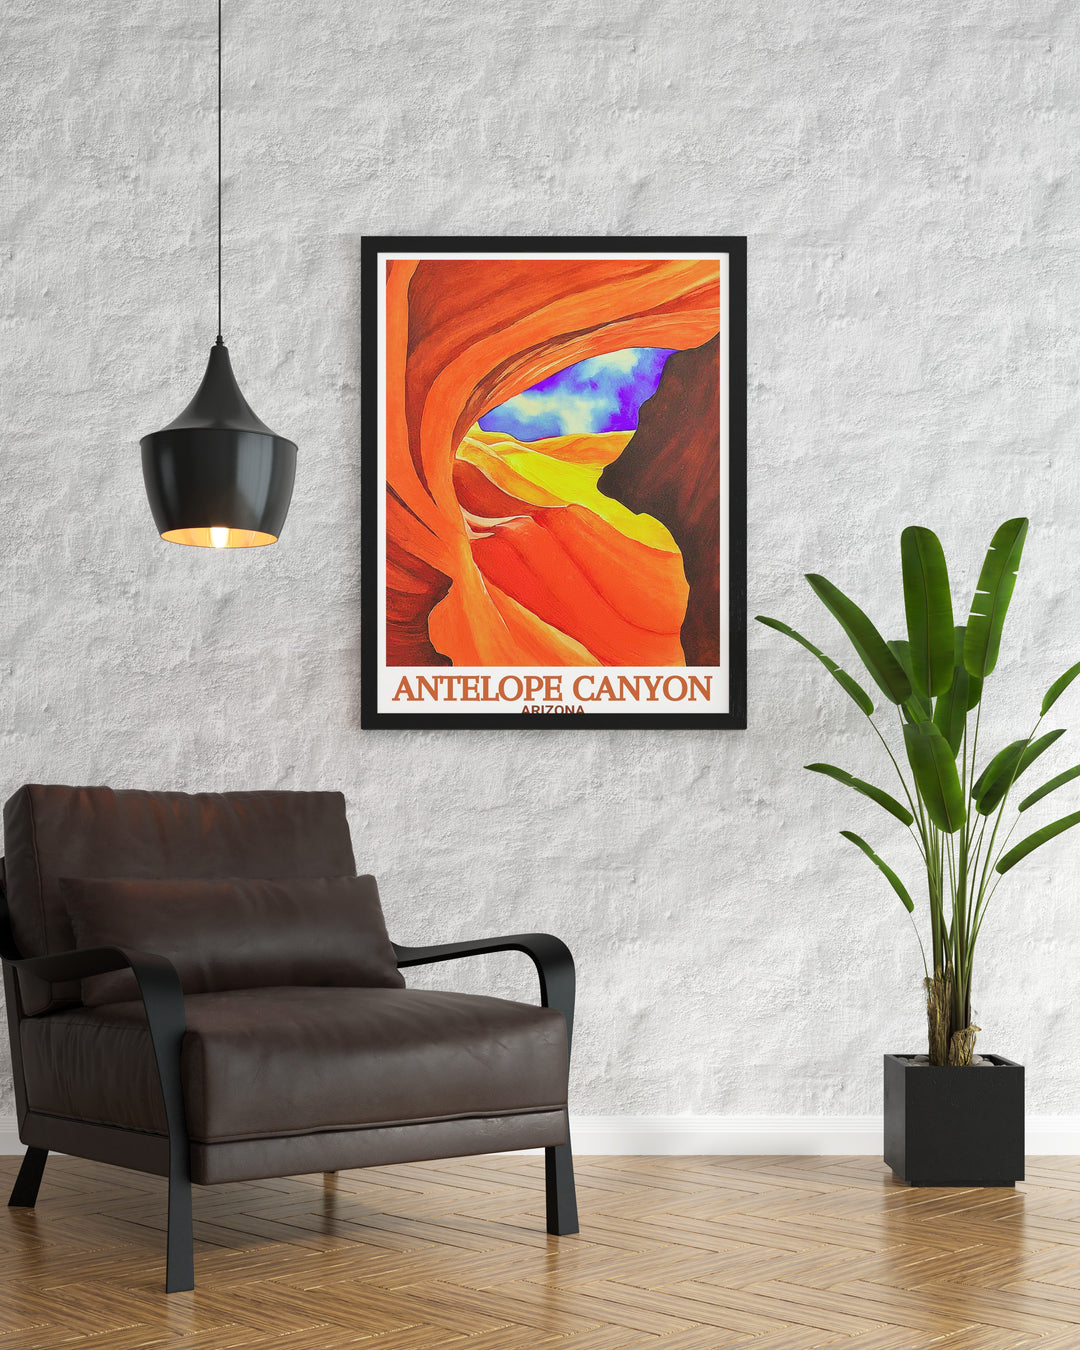 Arizona travel gift featuring a detailed illustration of Antelope Canyon showcasing the interplay of light and shadow within the canyon walls a unique and thoughtful present for art lovers.